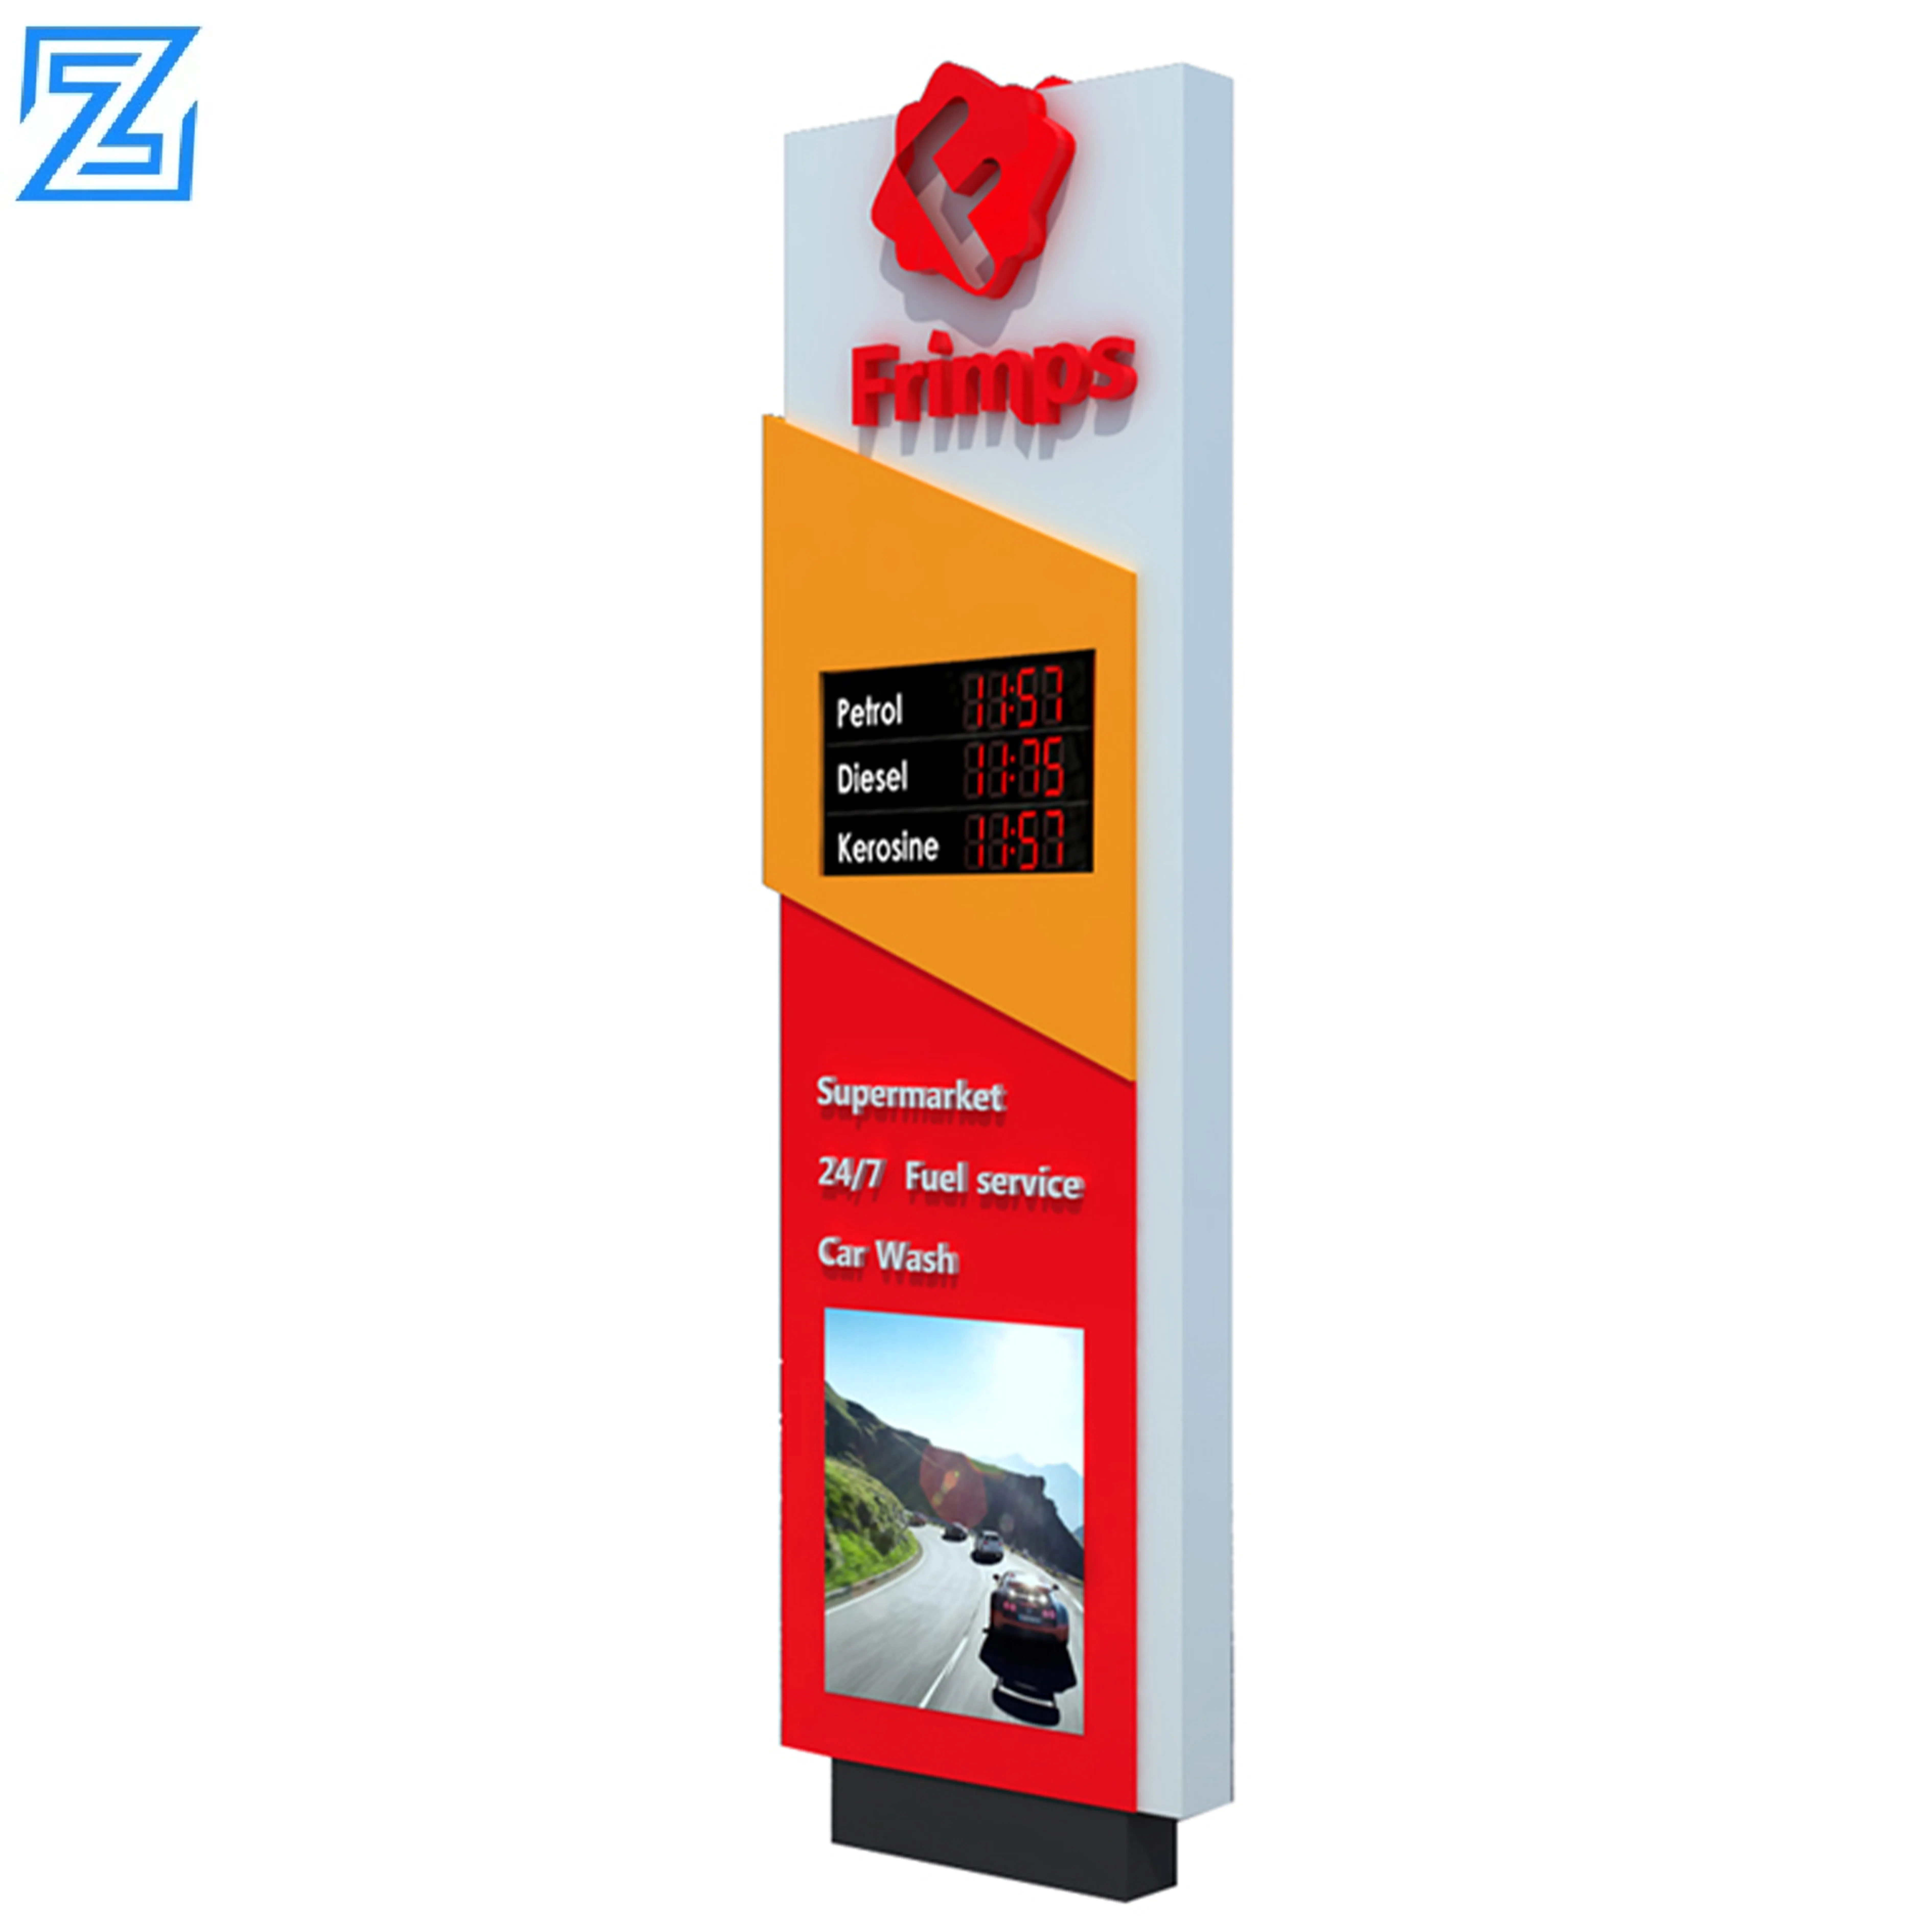 Aluminum or aluminum composite panel double side advertising pylon sign for gas station Petrol Station Totem